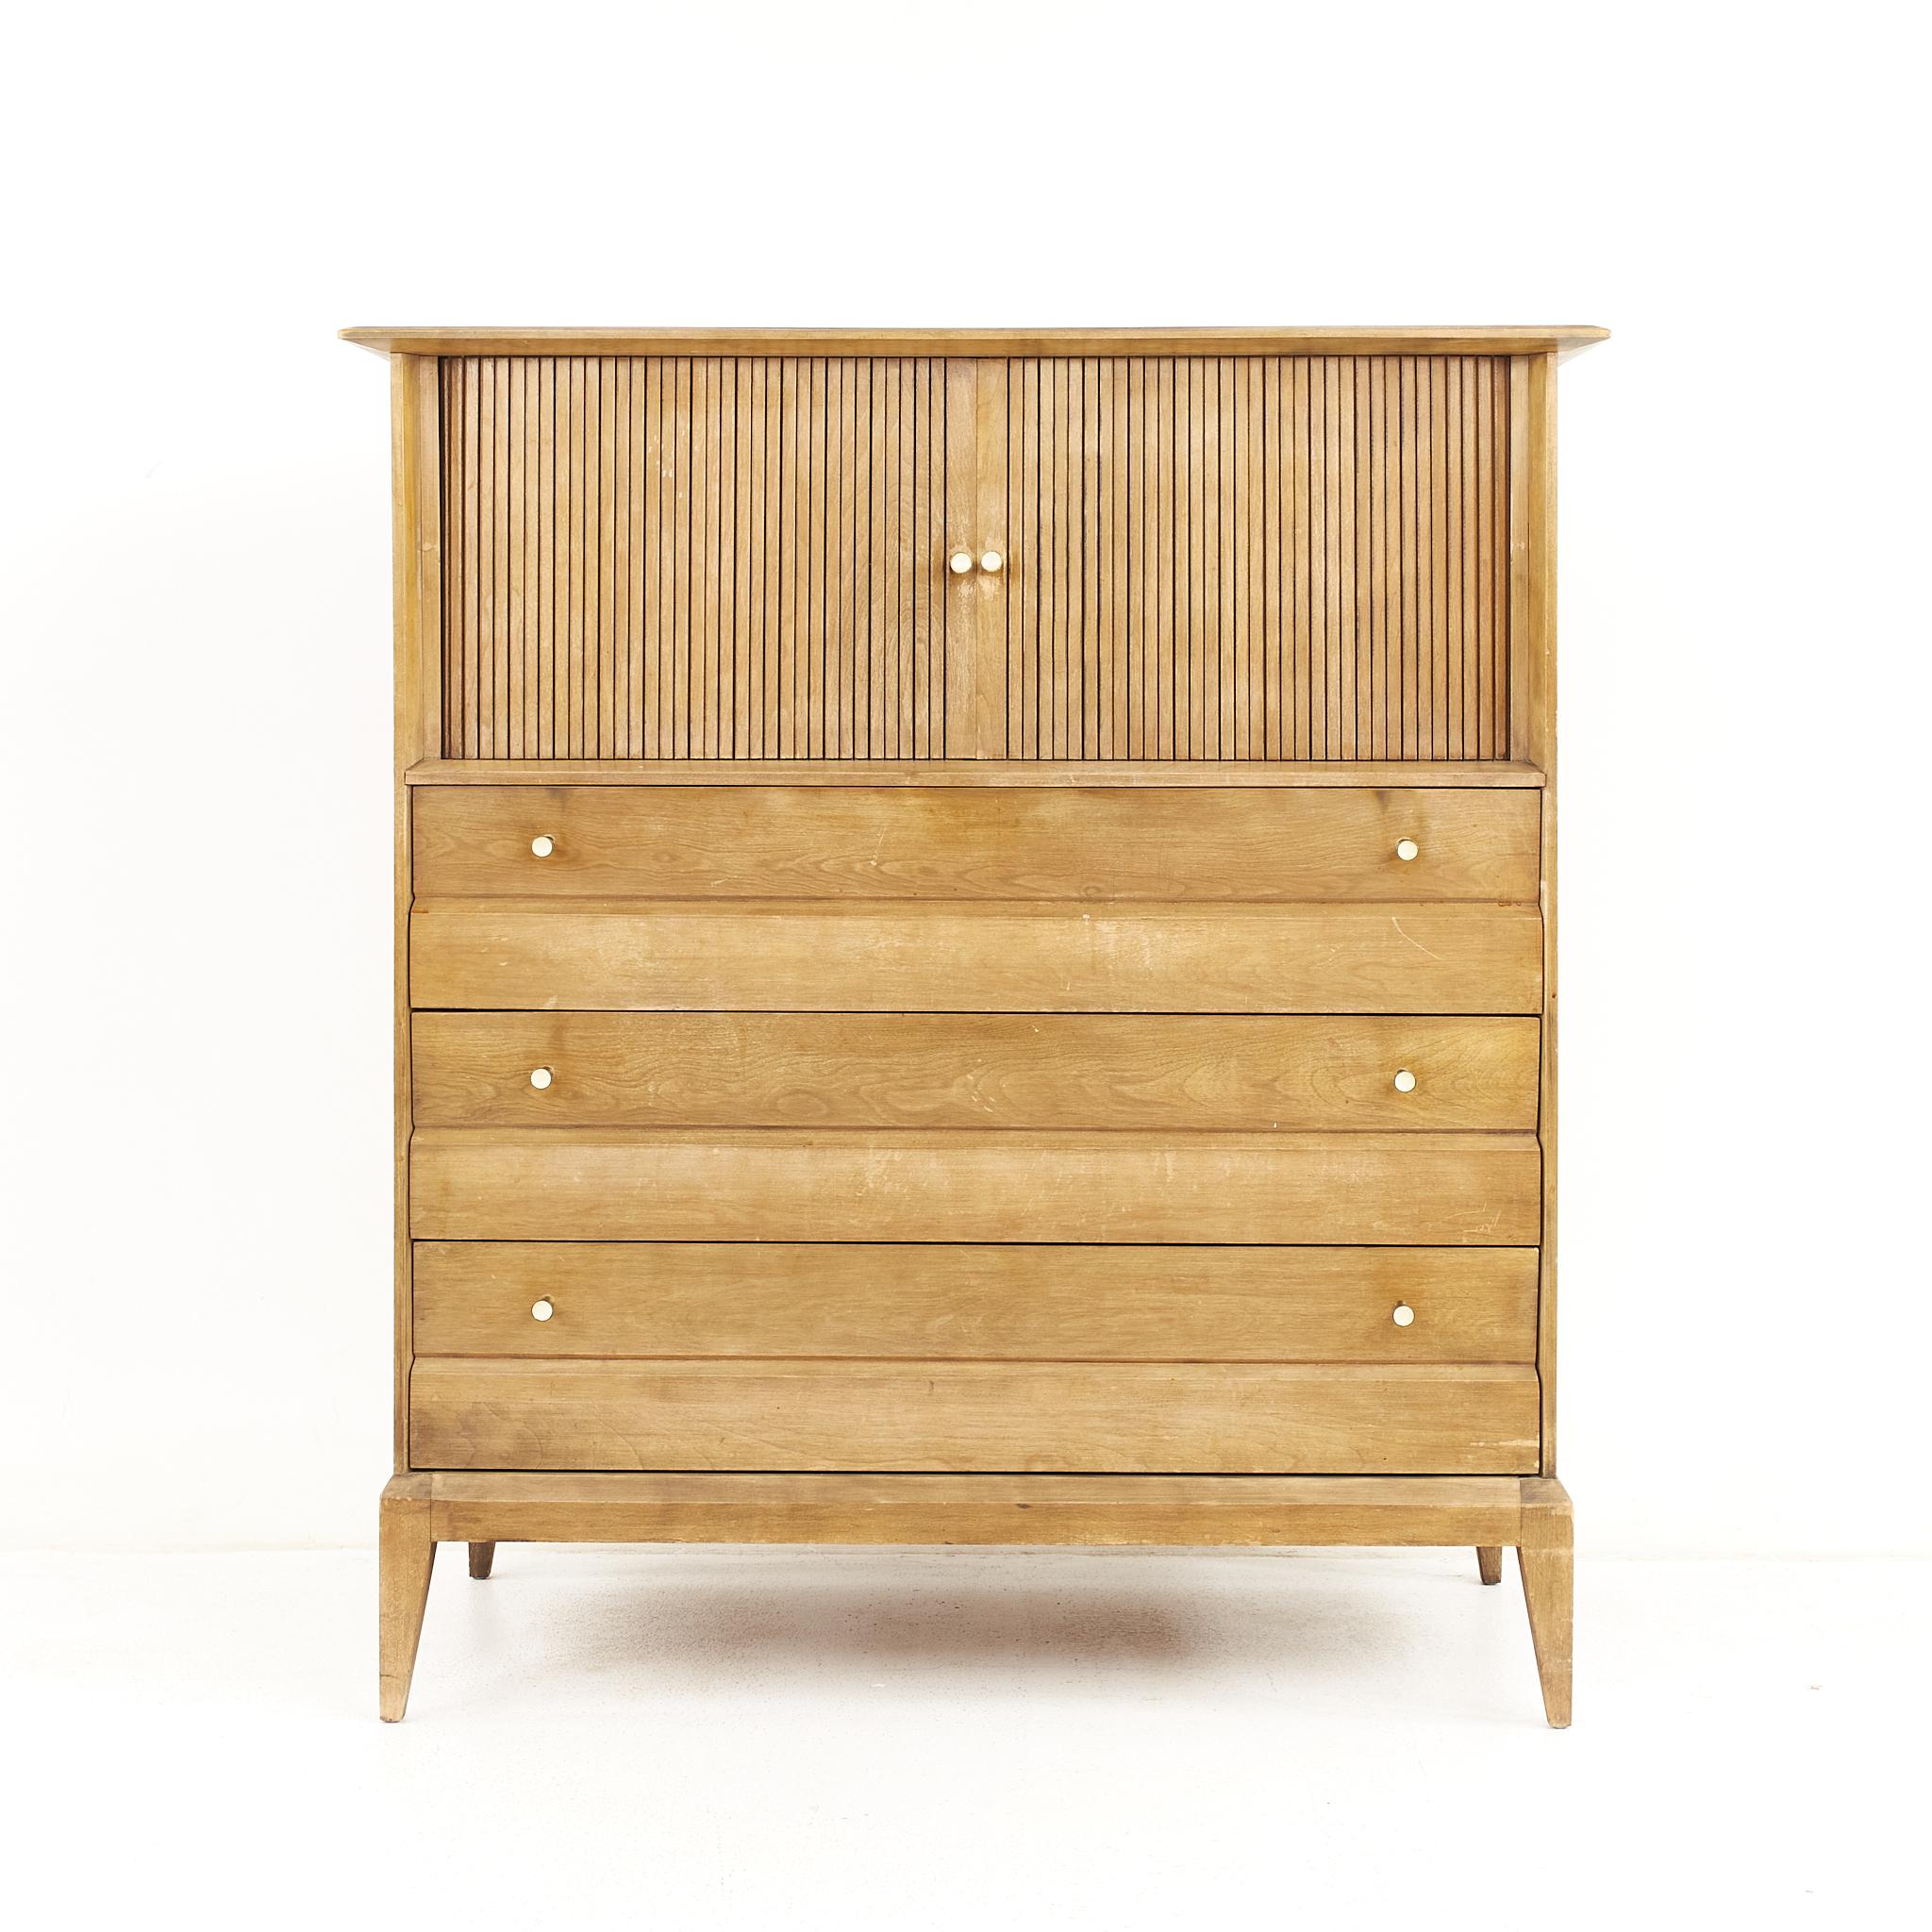 Heywood Wakefield mid century tambour door highboy dresser

The dresser measures: 41 wide x 20.5 deep x 45.5 inches high

All pieces of furniture can be had in what we call restored vintage condition. That means the piece is restored upon